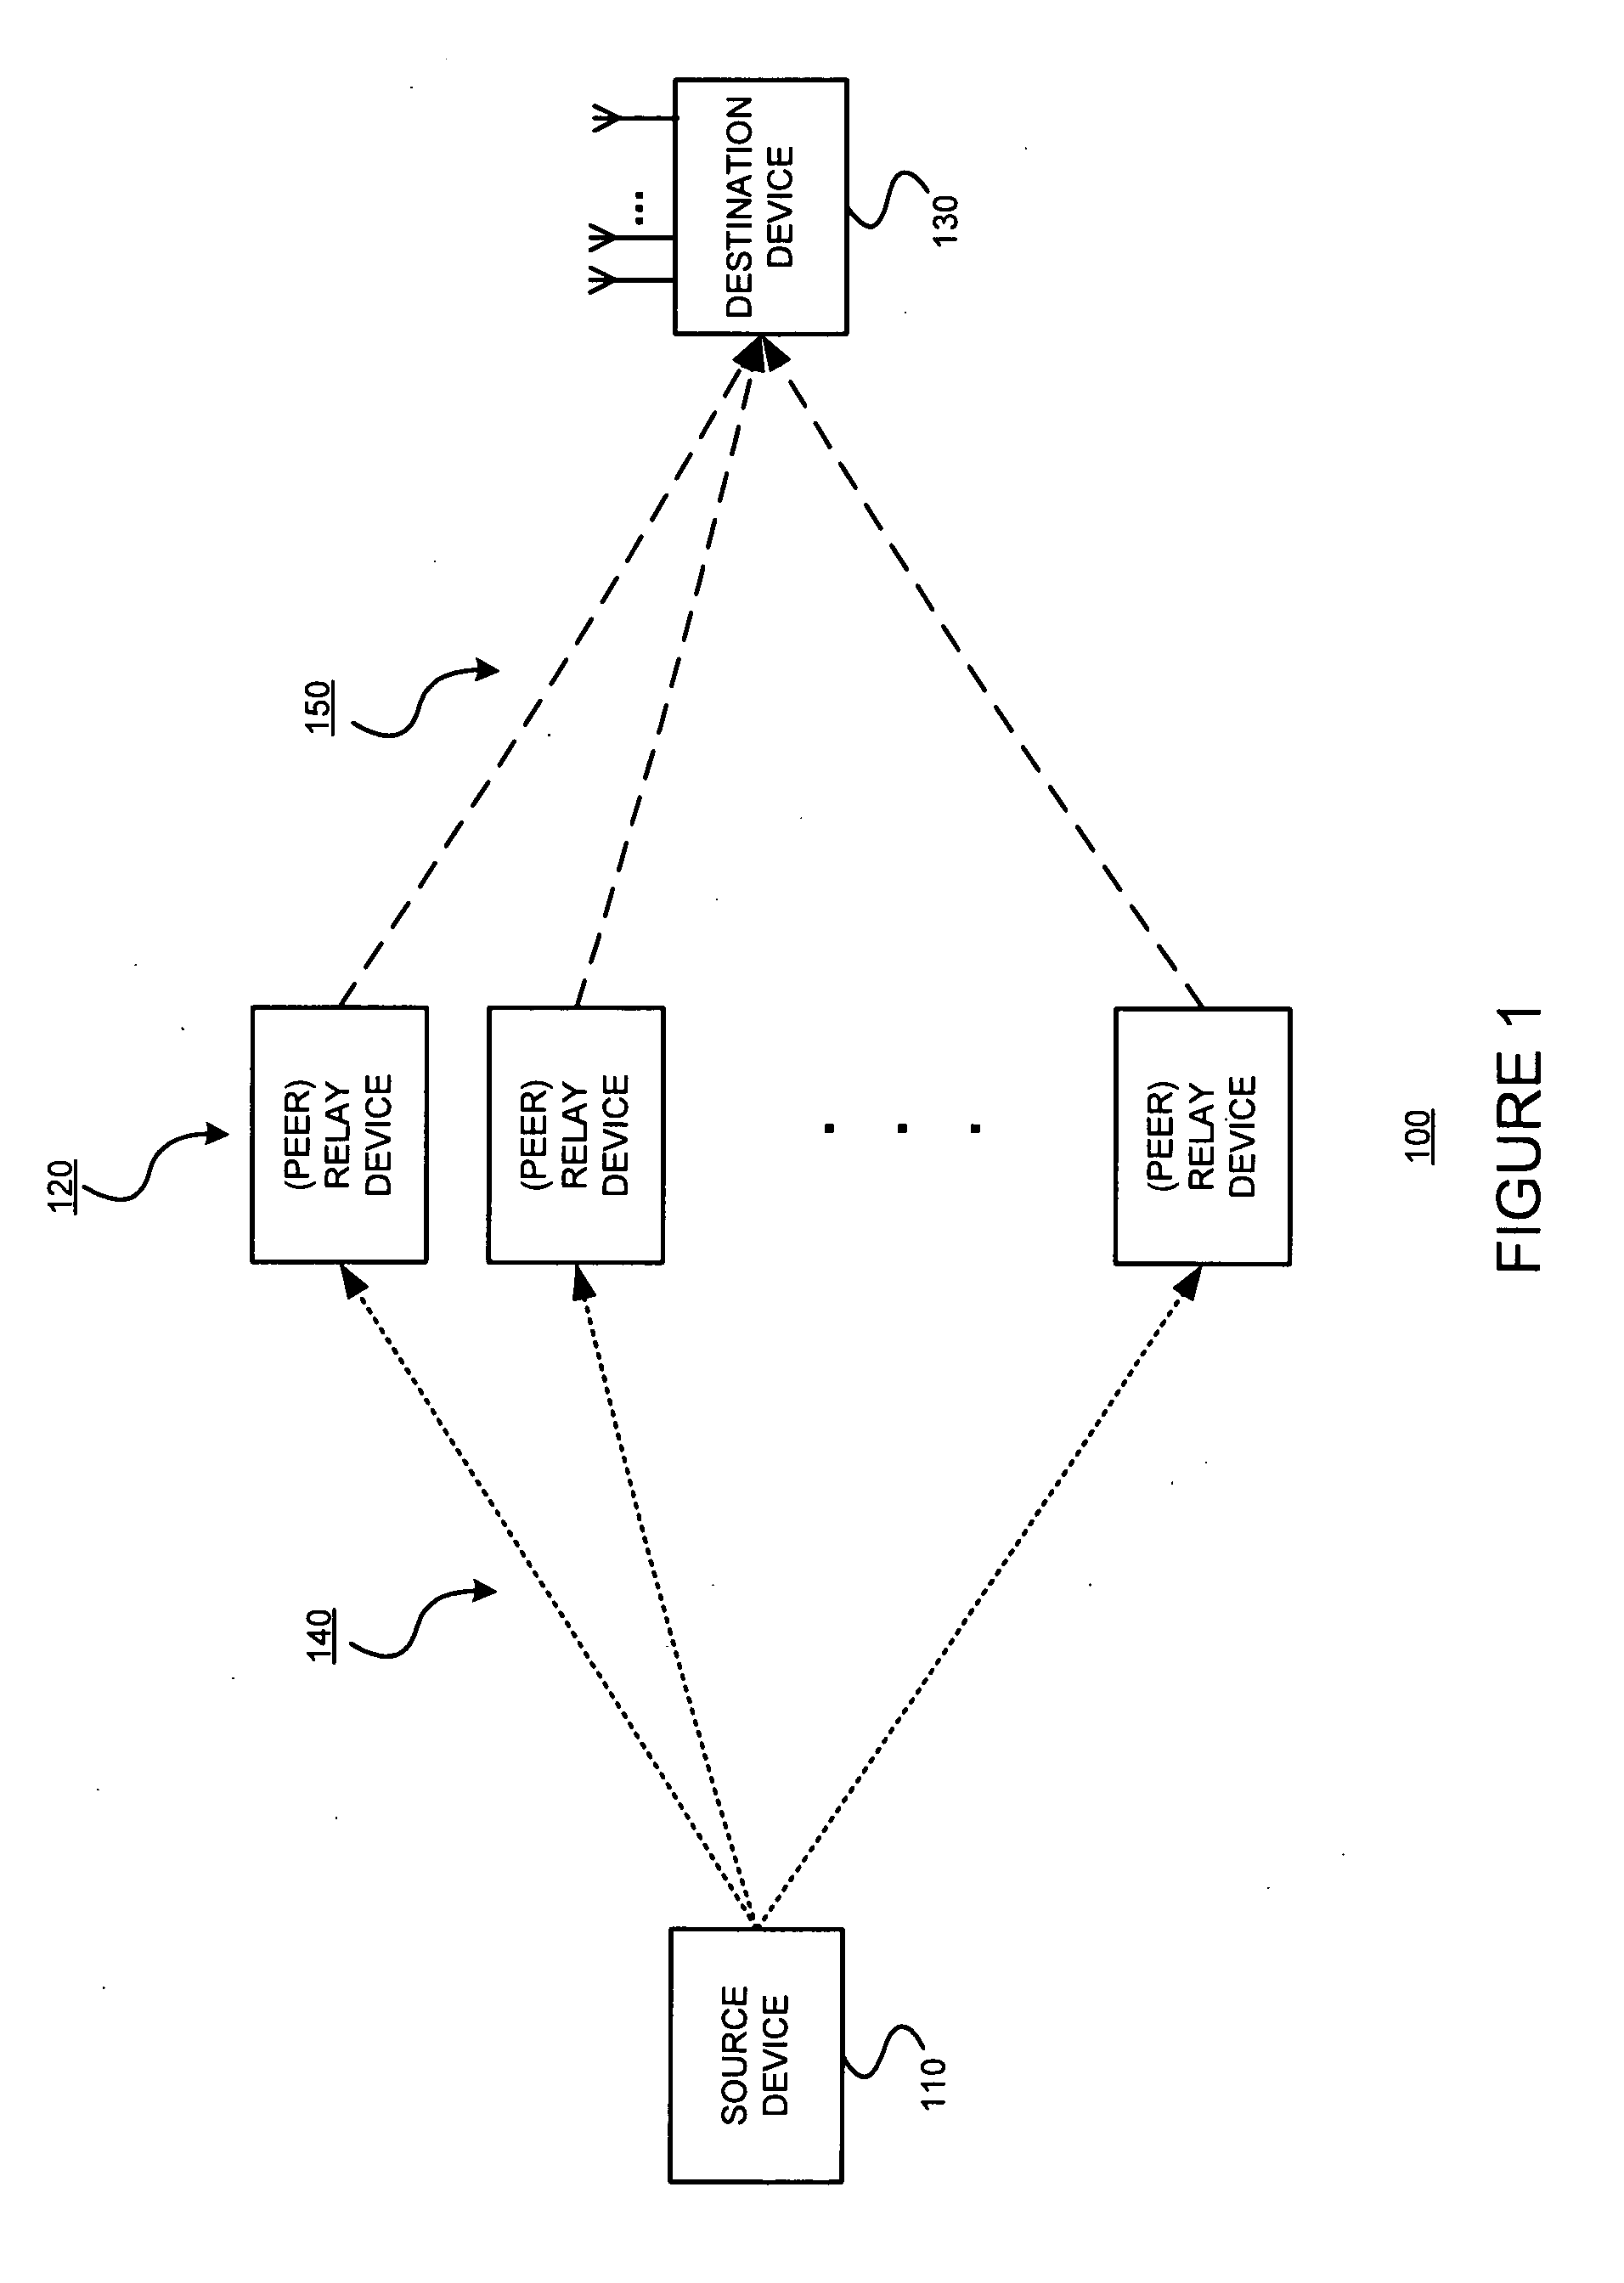 Spatial multiplexing gain for a distributed cooperative communications system using randomized coding